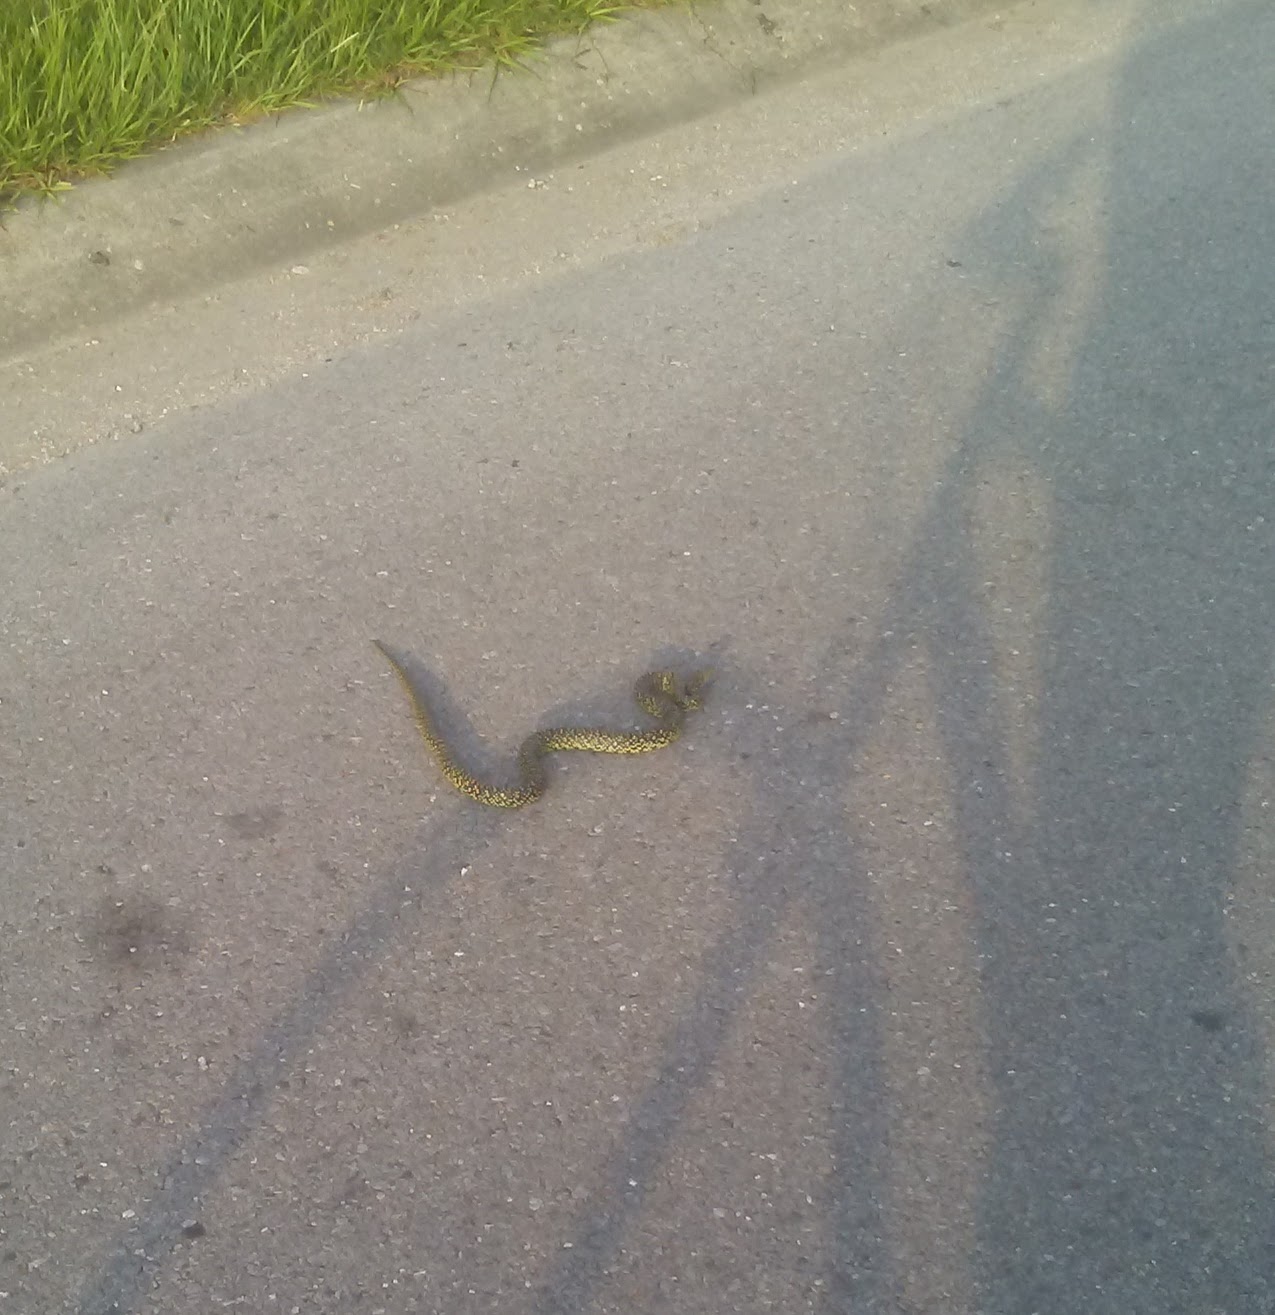 speckled king snake in the road